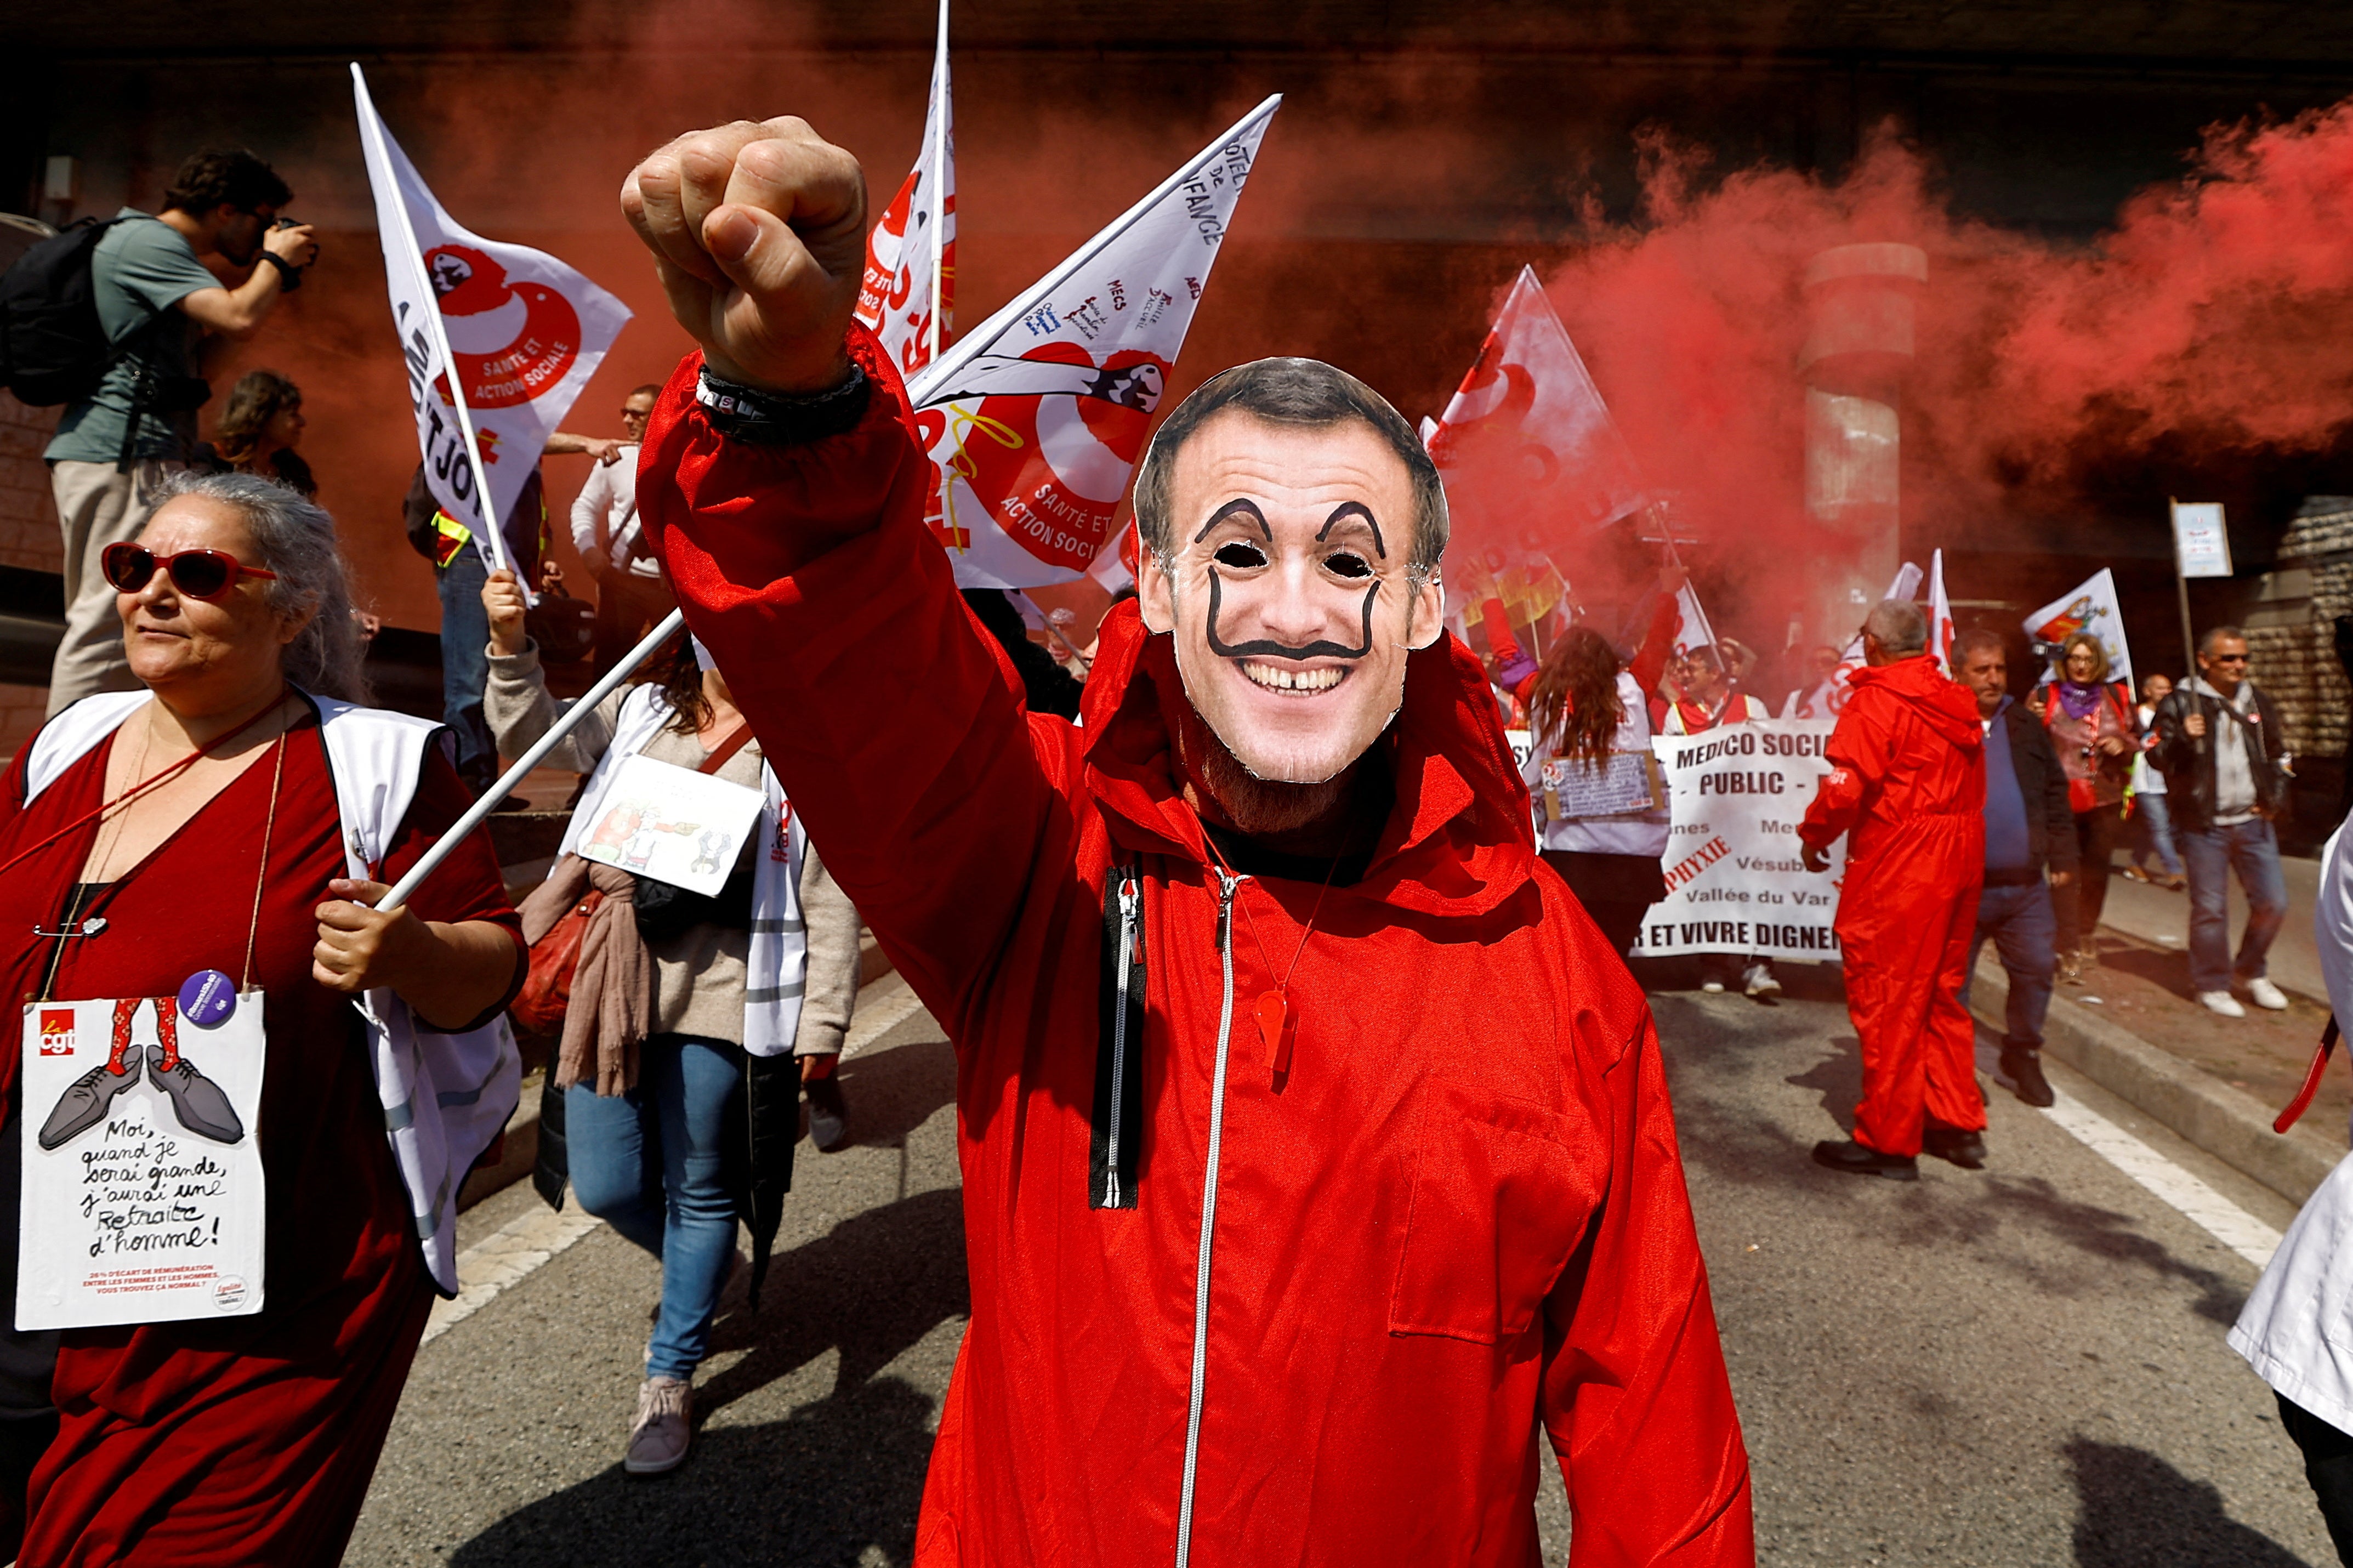 A protester wearing a Macron mask at a demonstration in Nice on Thursday